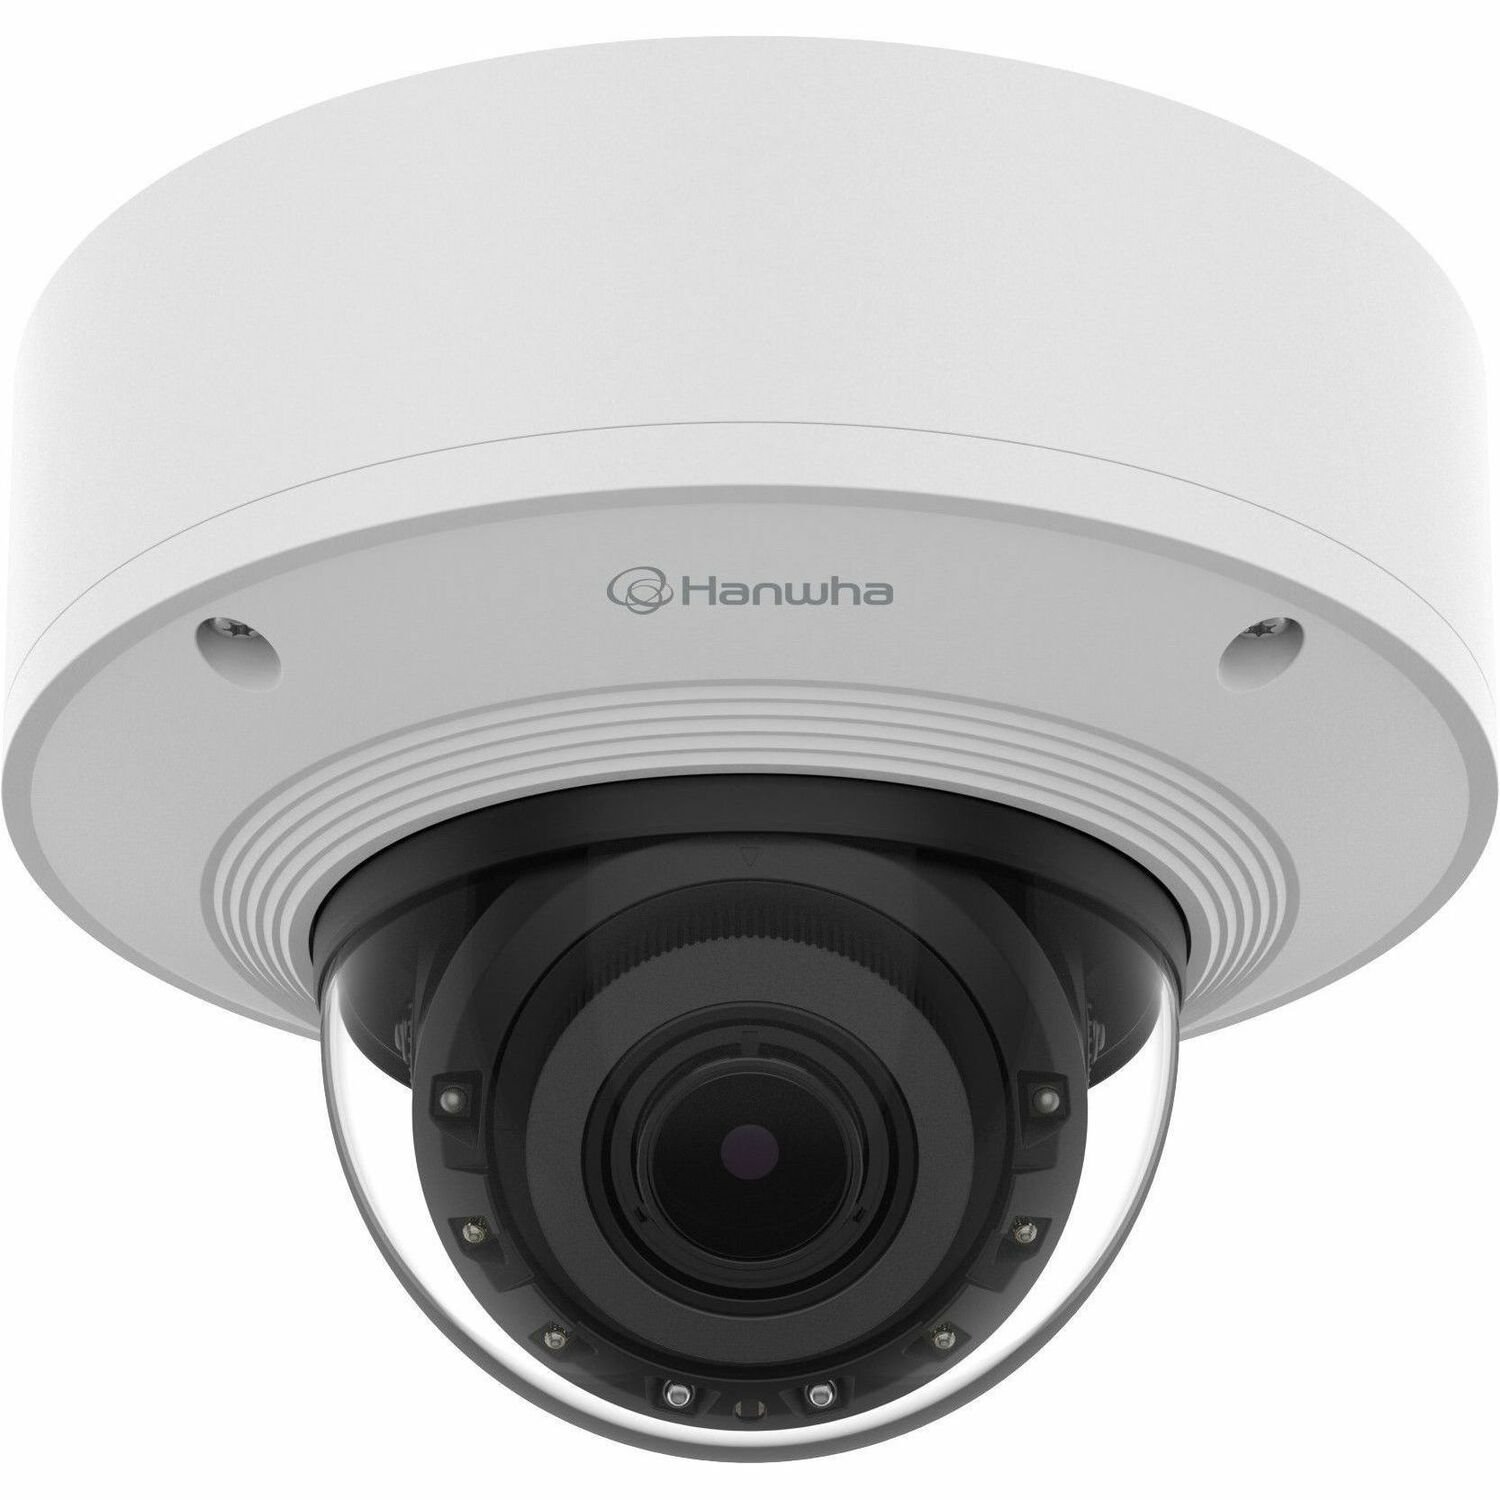 Hanwha PNV-A6081R-E1T 2 Megapixel Outdoor Full HD Network Camera - Color - Dome - White